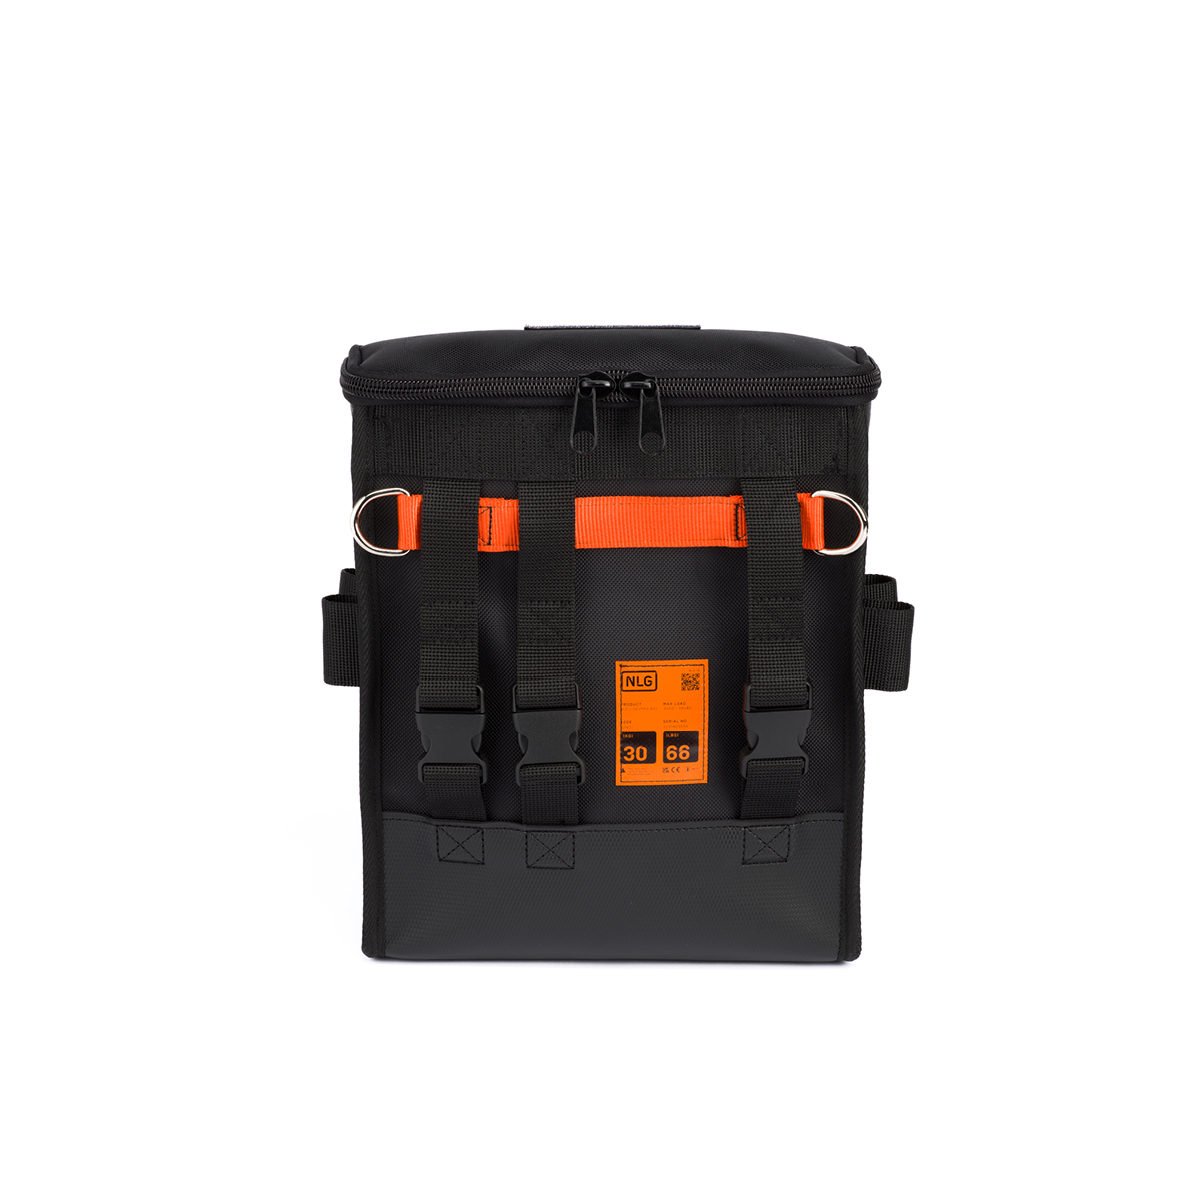 NLG Linesman Bag from Columbia Safety